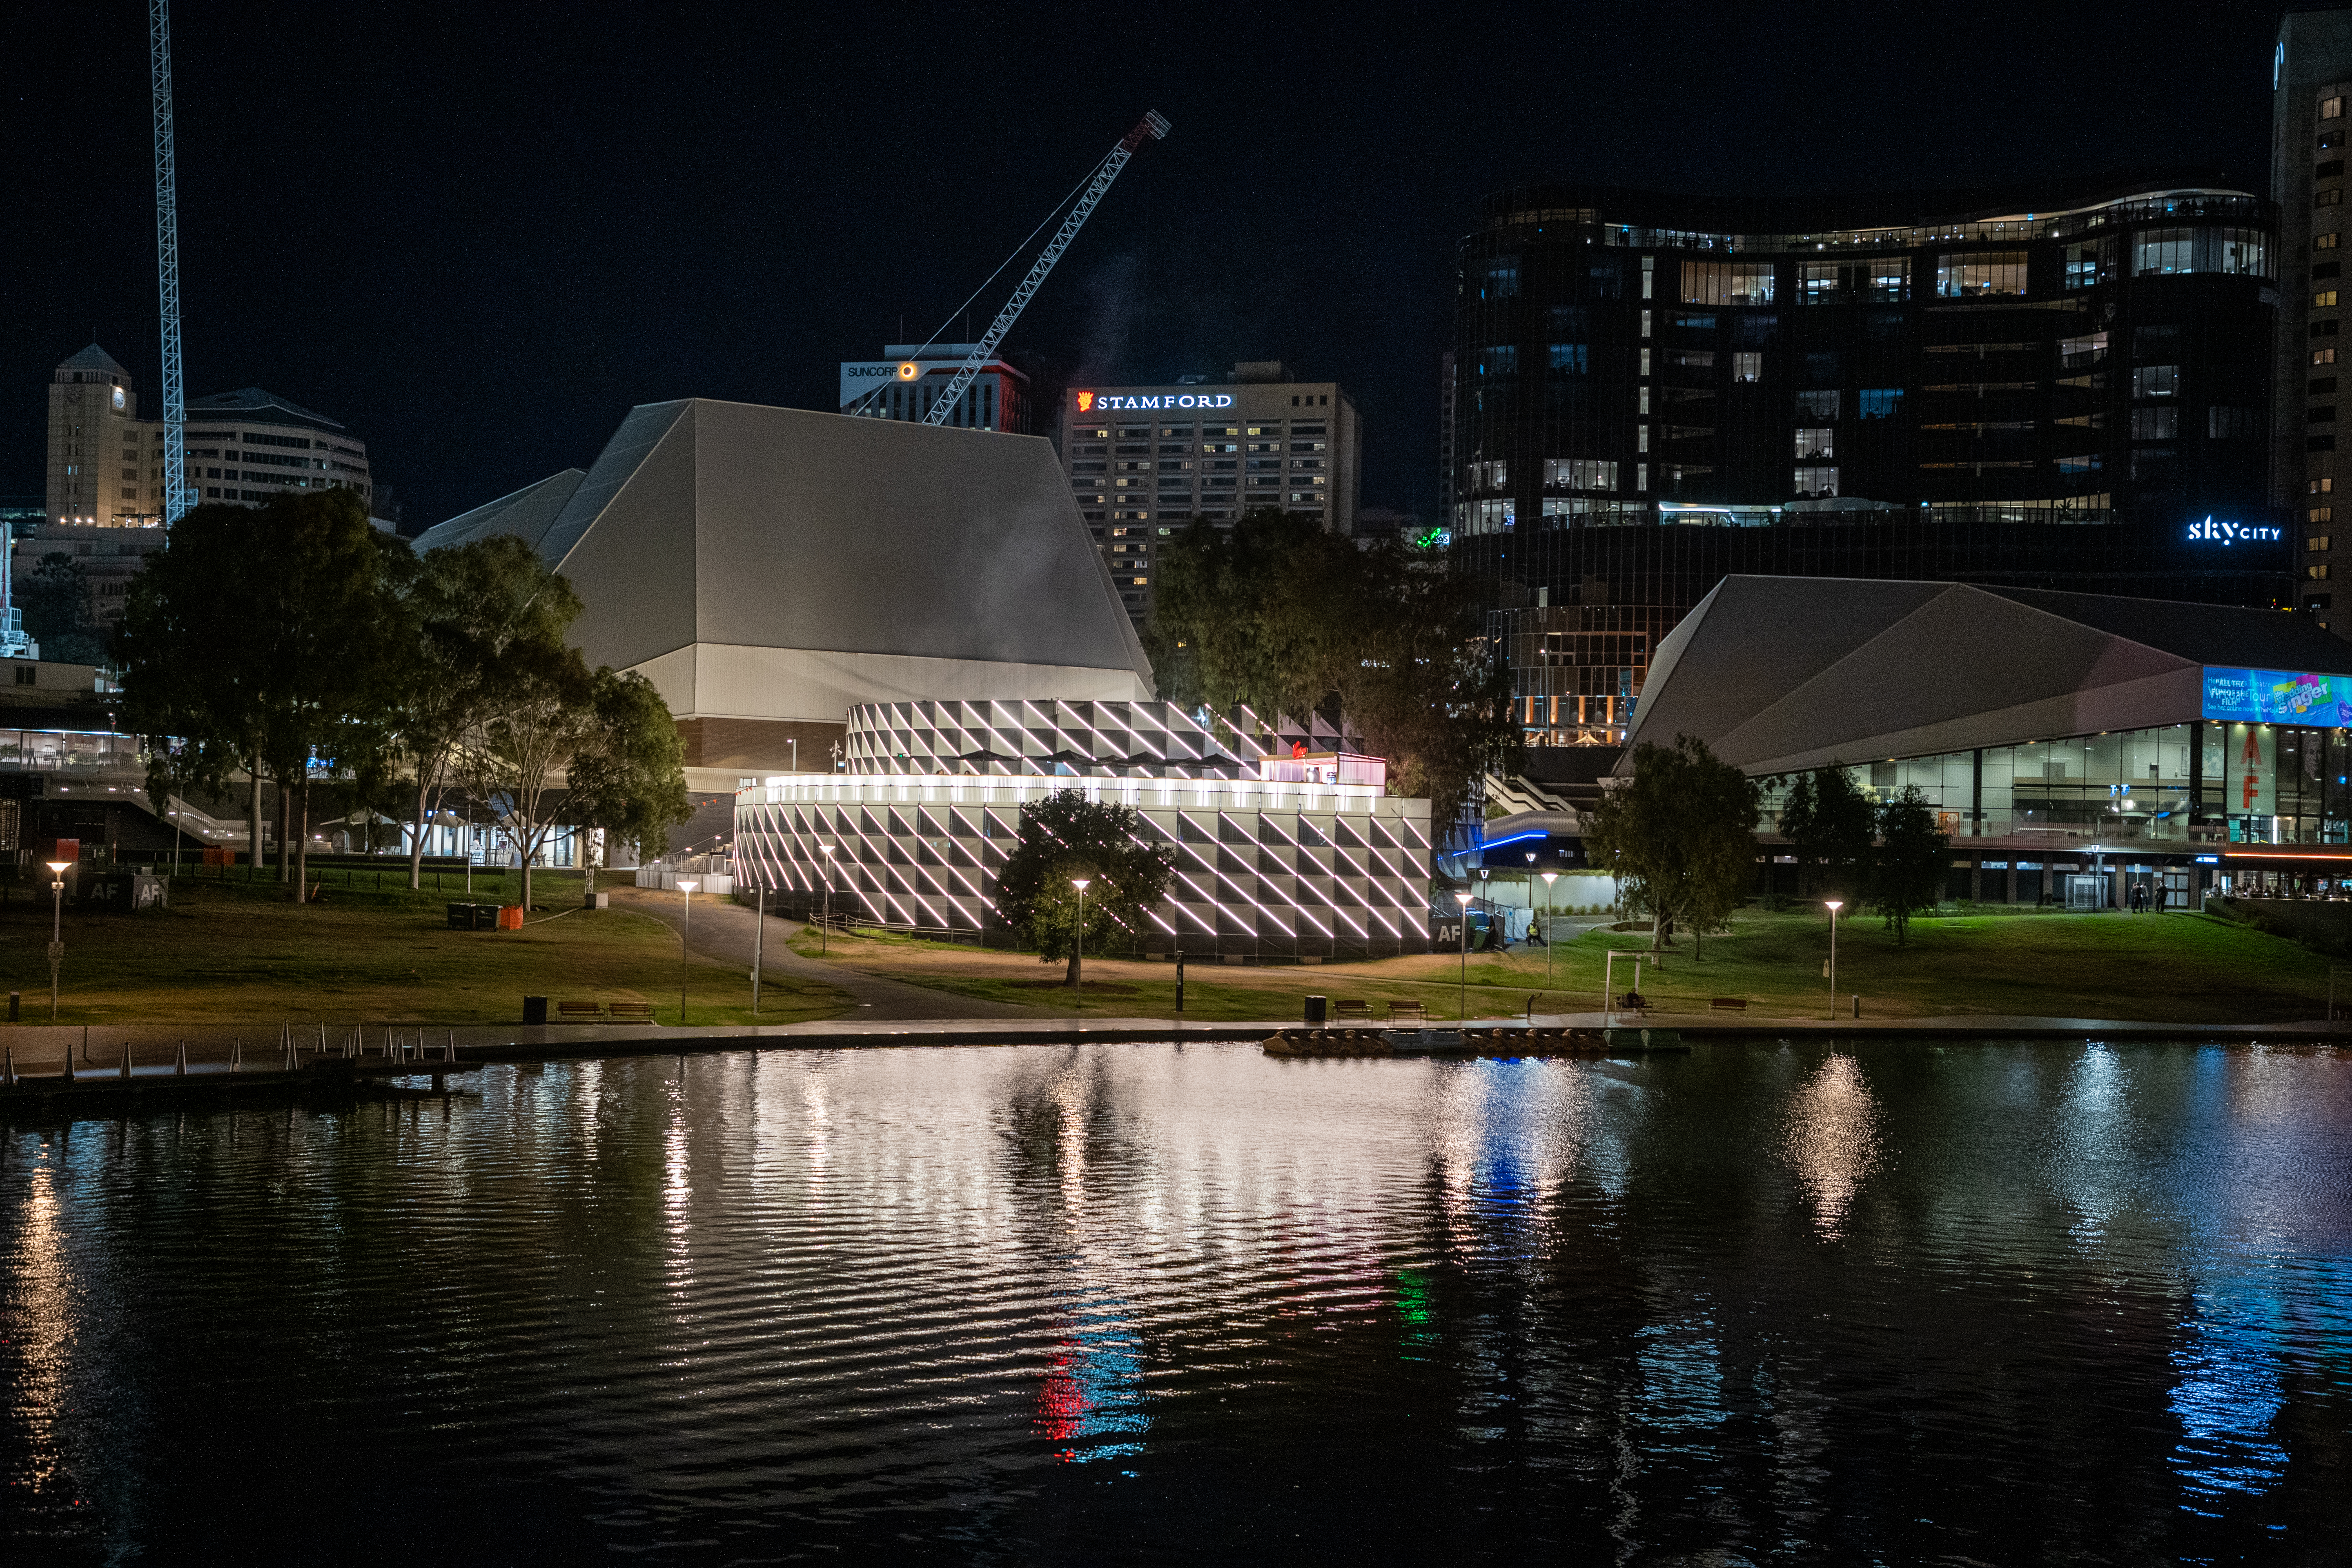 The Summerhouse, a large black-and-white chequered pavillion, sits between the Adelaide Festival Centre and Karrawirra Parri (River Torrens).